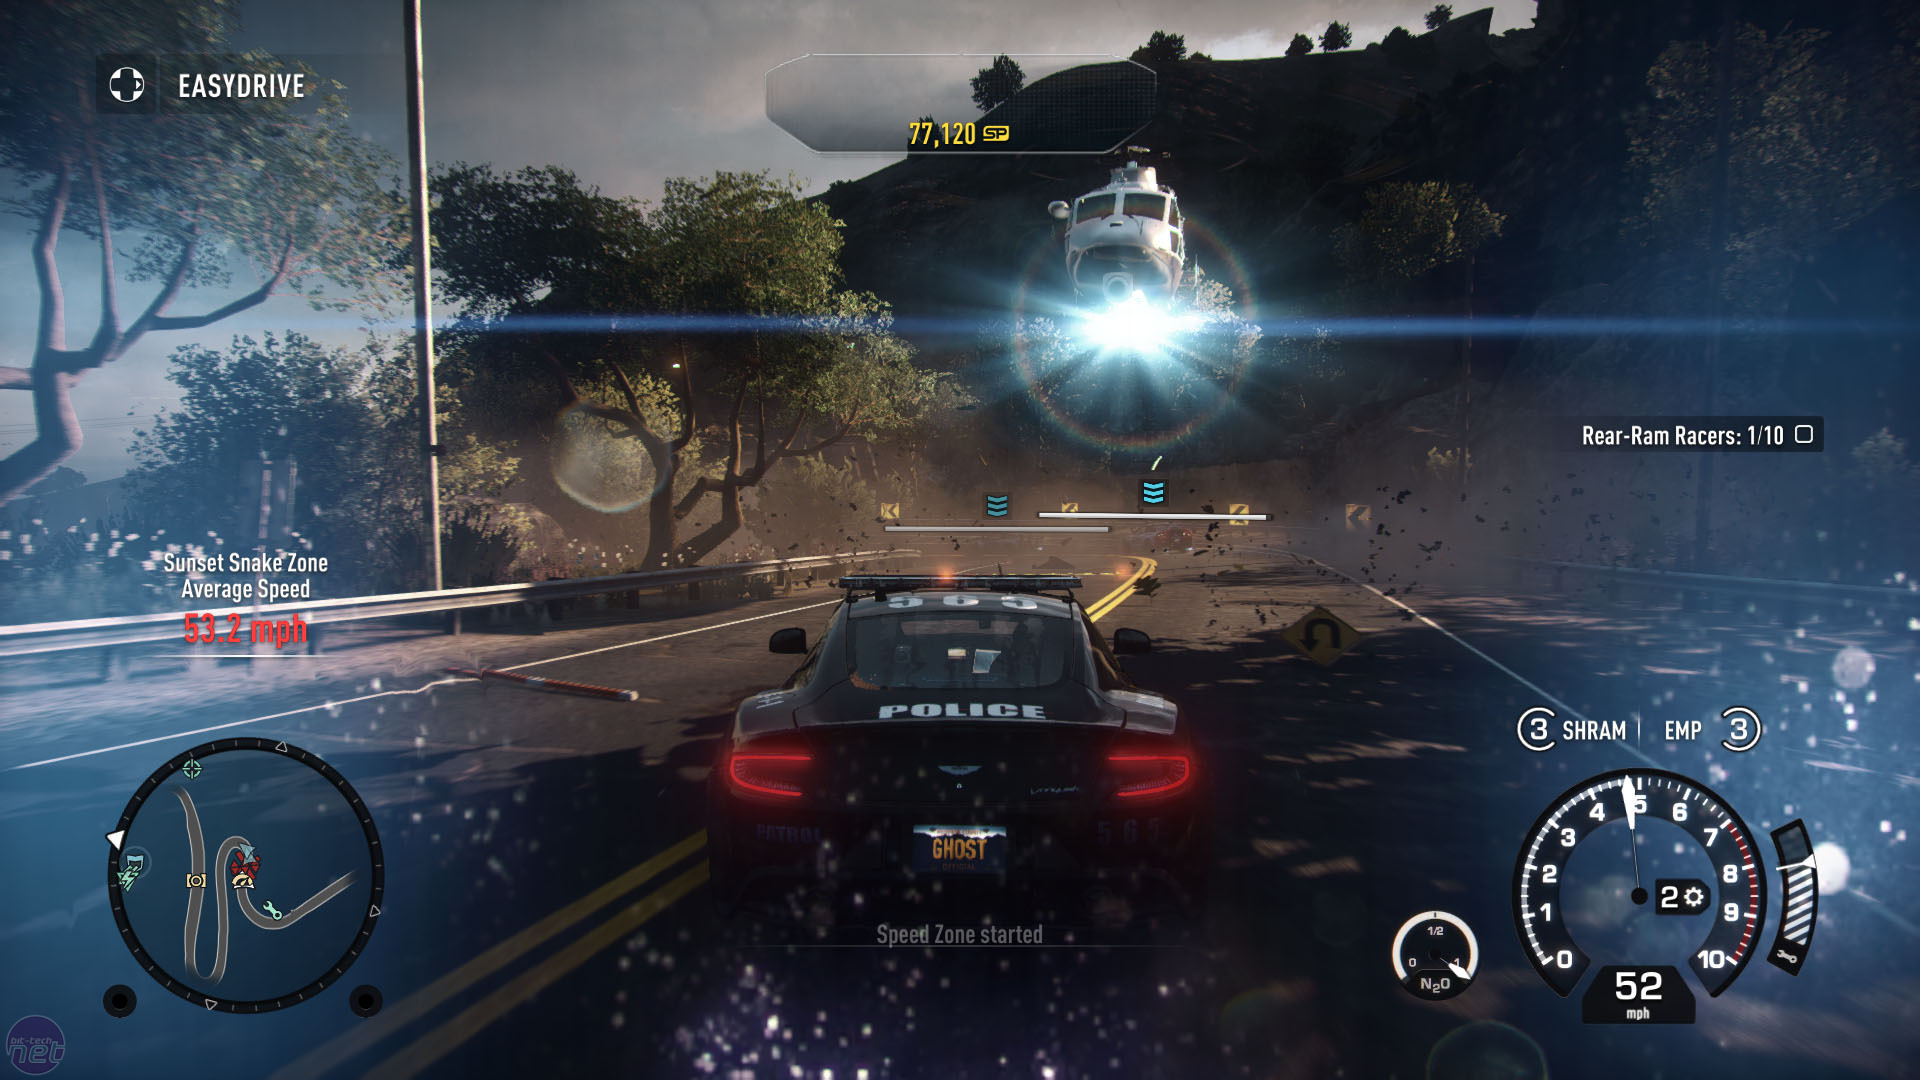 Review: 'Need For Speed Rivals' a high-speed thriller